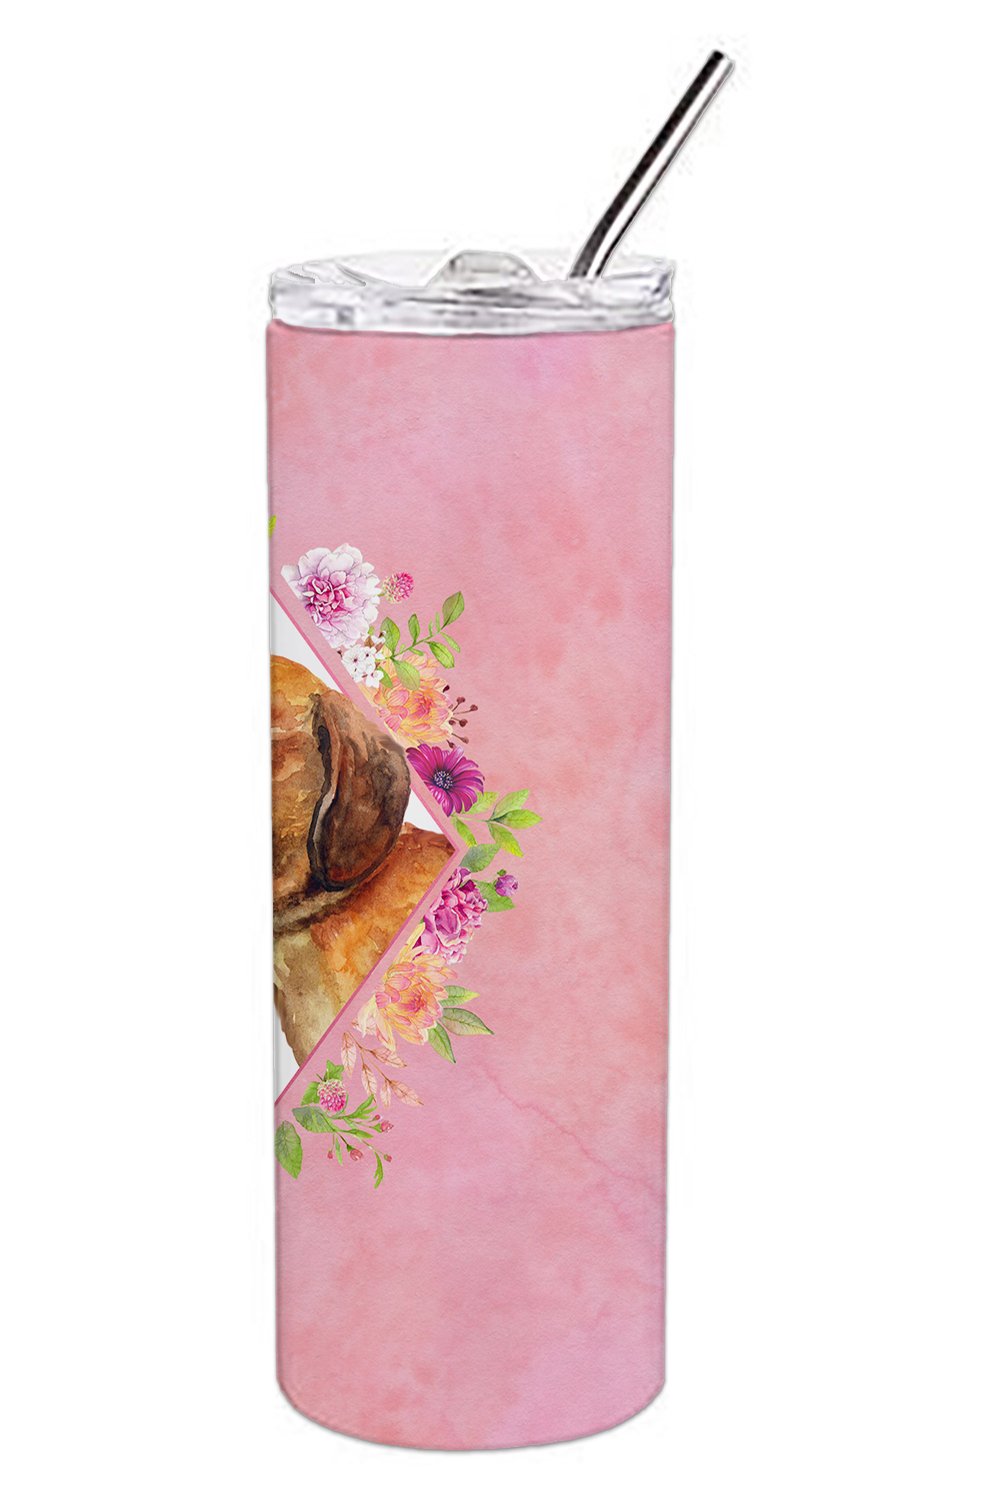 Dachshund Red #1 Pink Flowers Double Walled Stainless Steel 20 oz Skinny Tumbler CK4134TBL20 by Caroline's Treasures